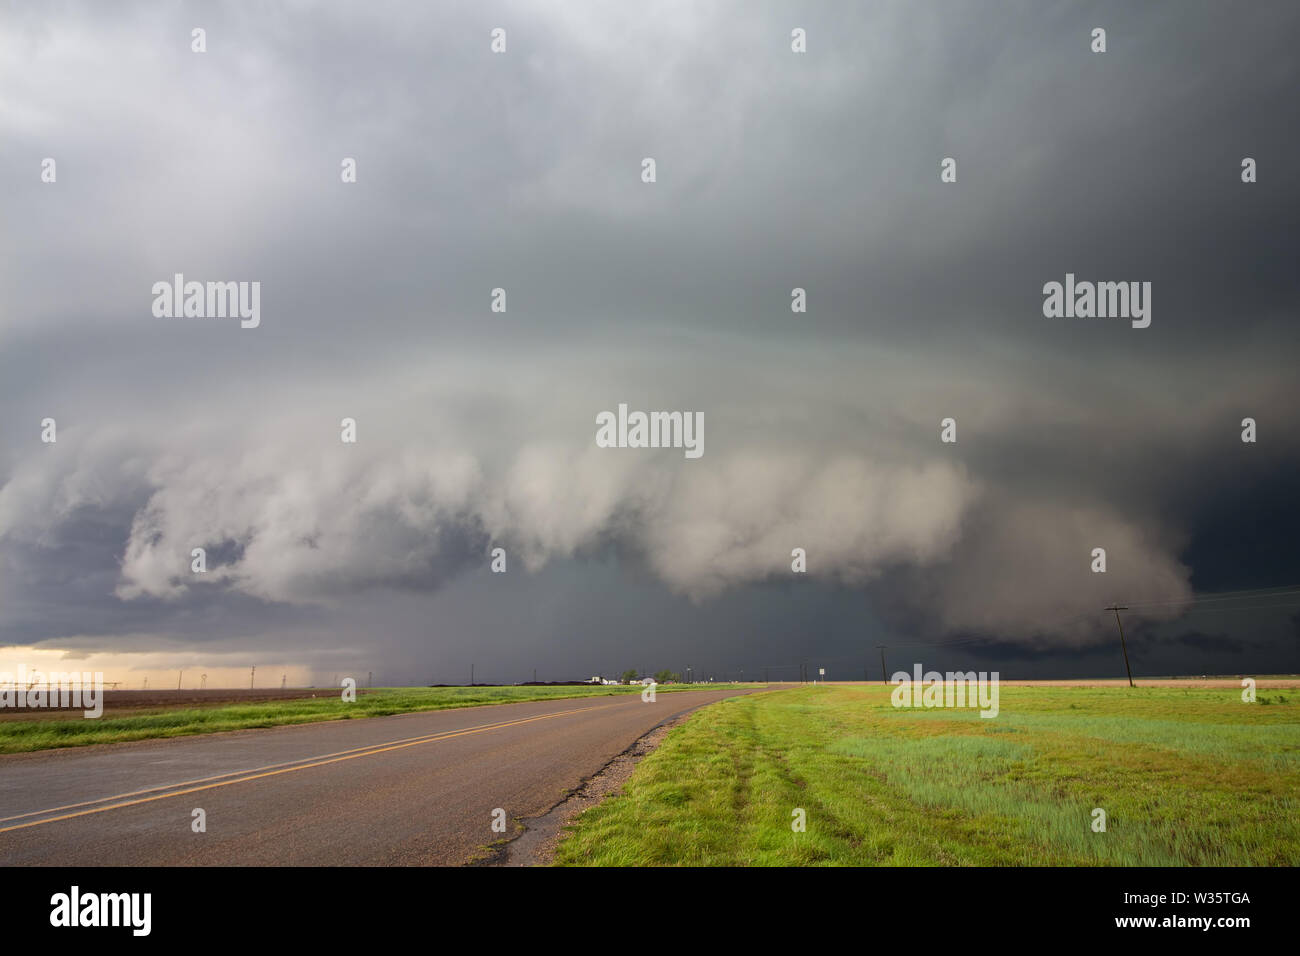 A big supercell storm with a shelf cloud and a wall cloud looms over a road in the rural countryside. Stock Photo